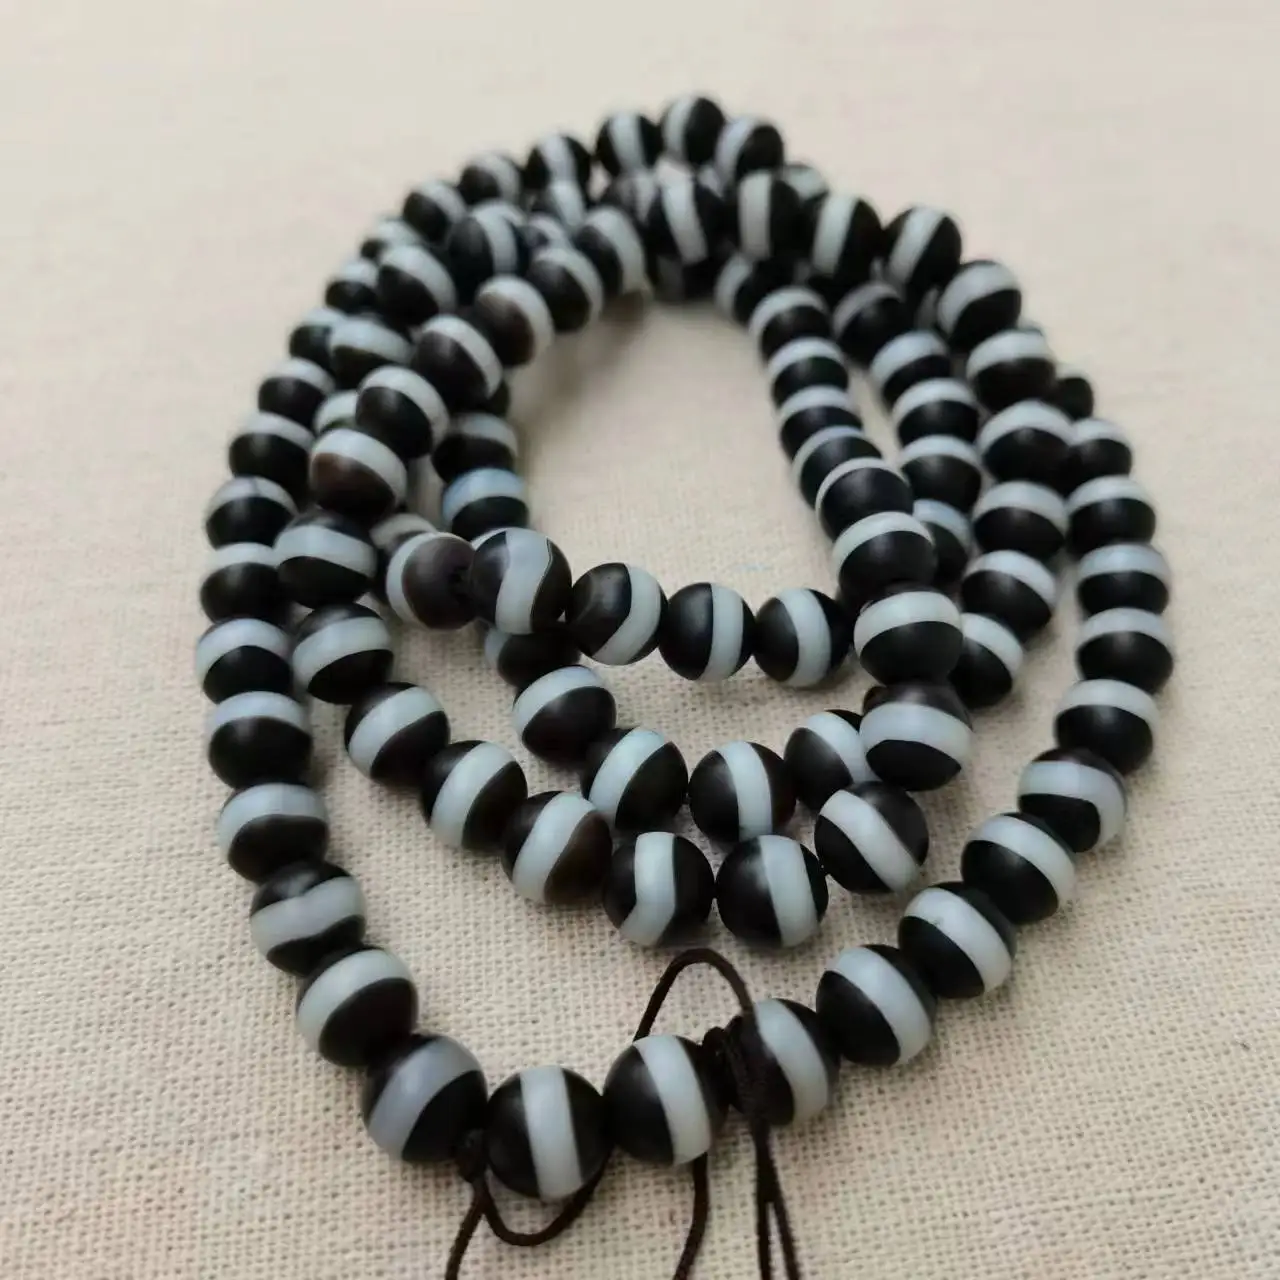 1pcs/lot natural stone black white striped first-line pharmacist beads 108 old agate cure disease ward off evil jewelry amulet